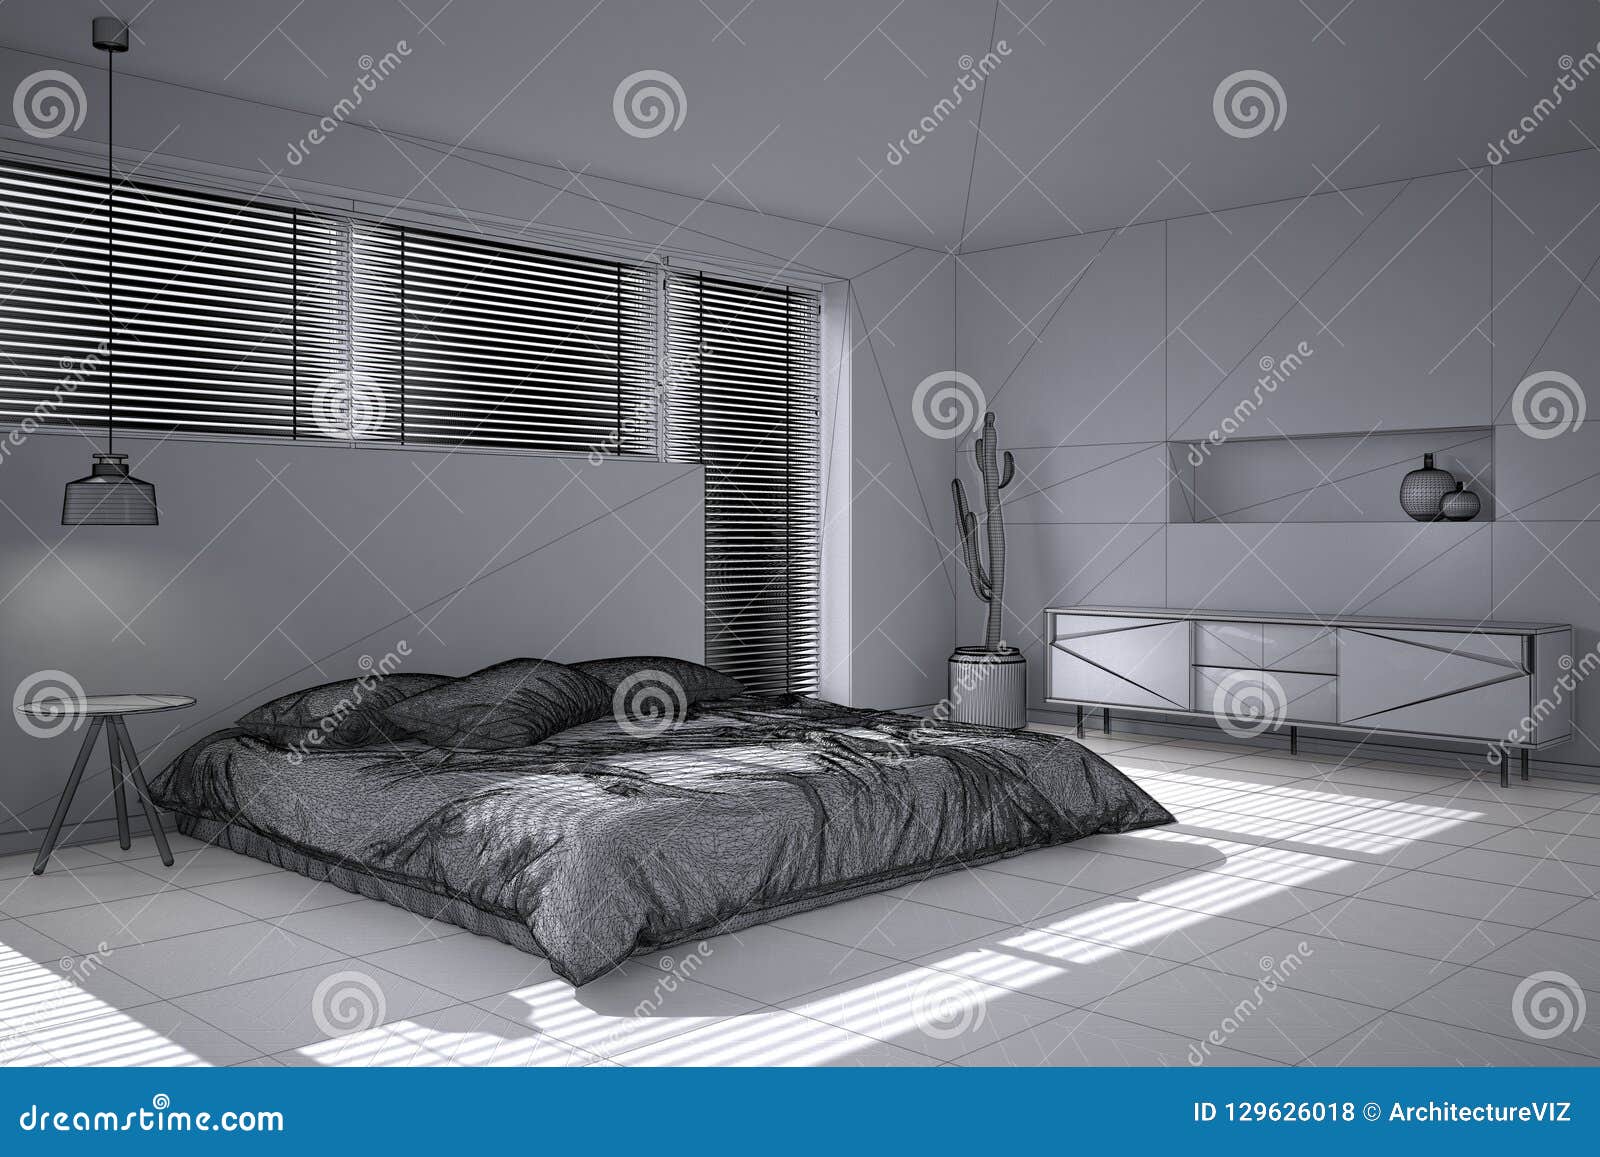 Unfinished Project Draft Sketch Of White Minimalist Bedroom